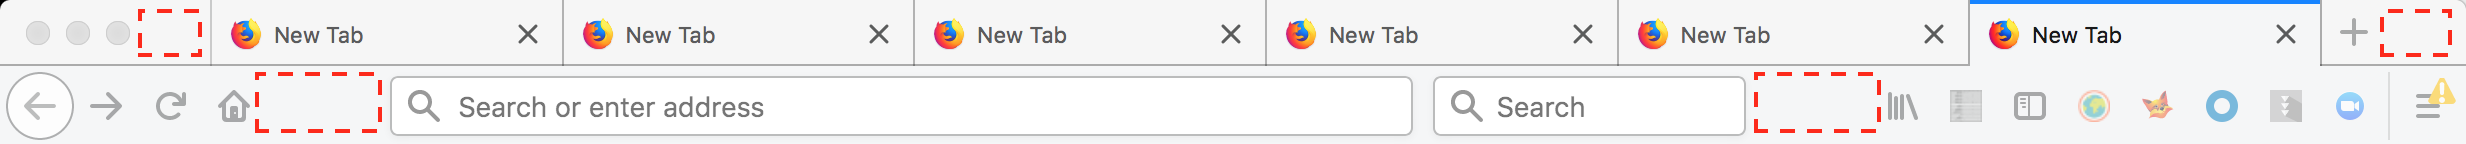 Application window header for Firefox Browser on MacOS